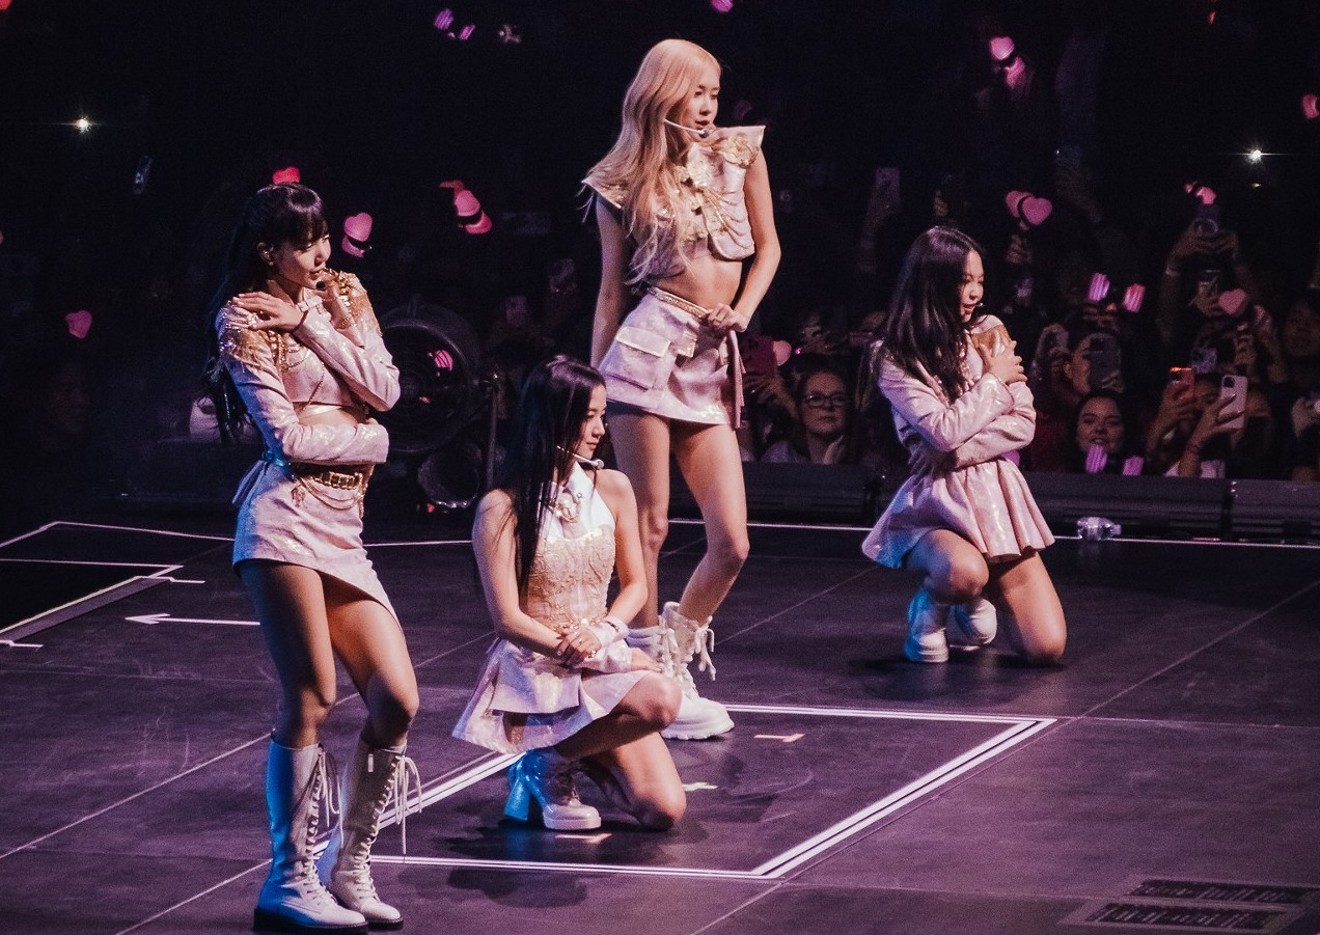 How to mix ballet core clothes like Jennie Blackpink on the world tour born pink